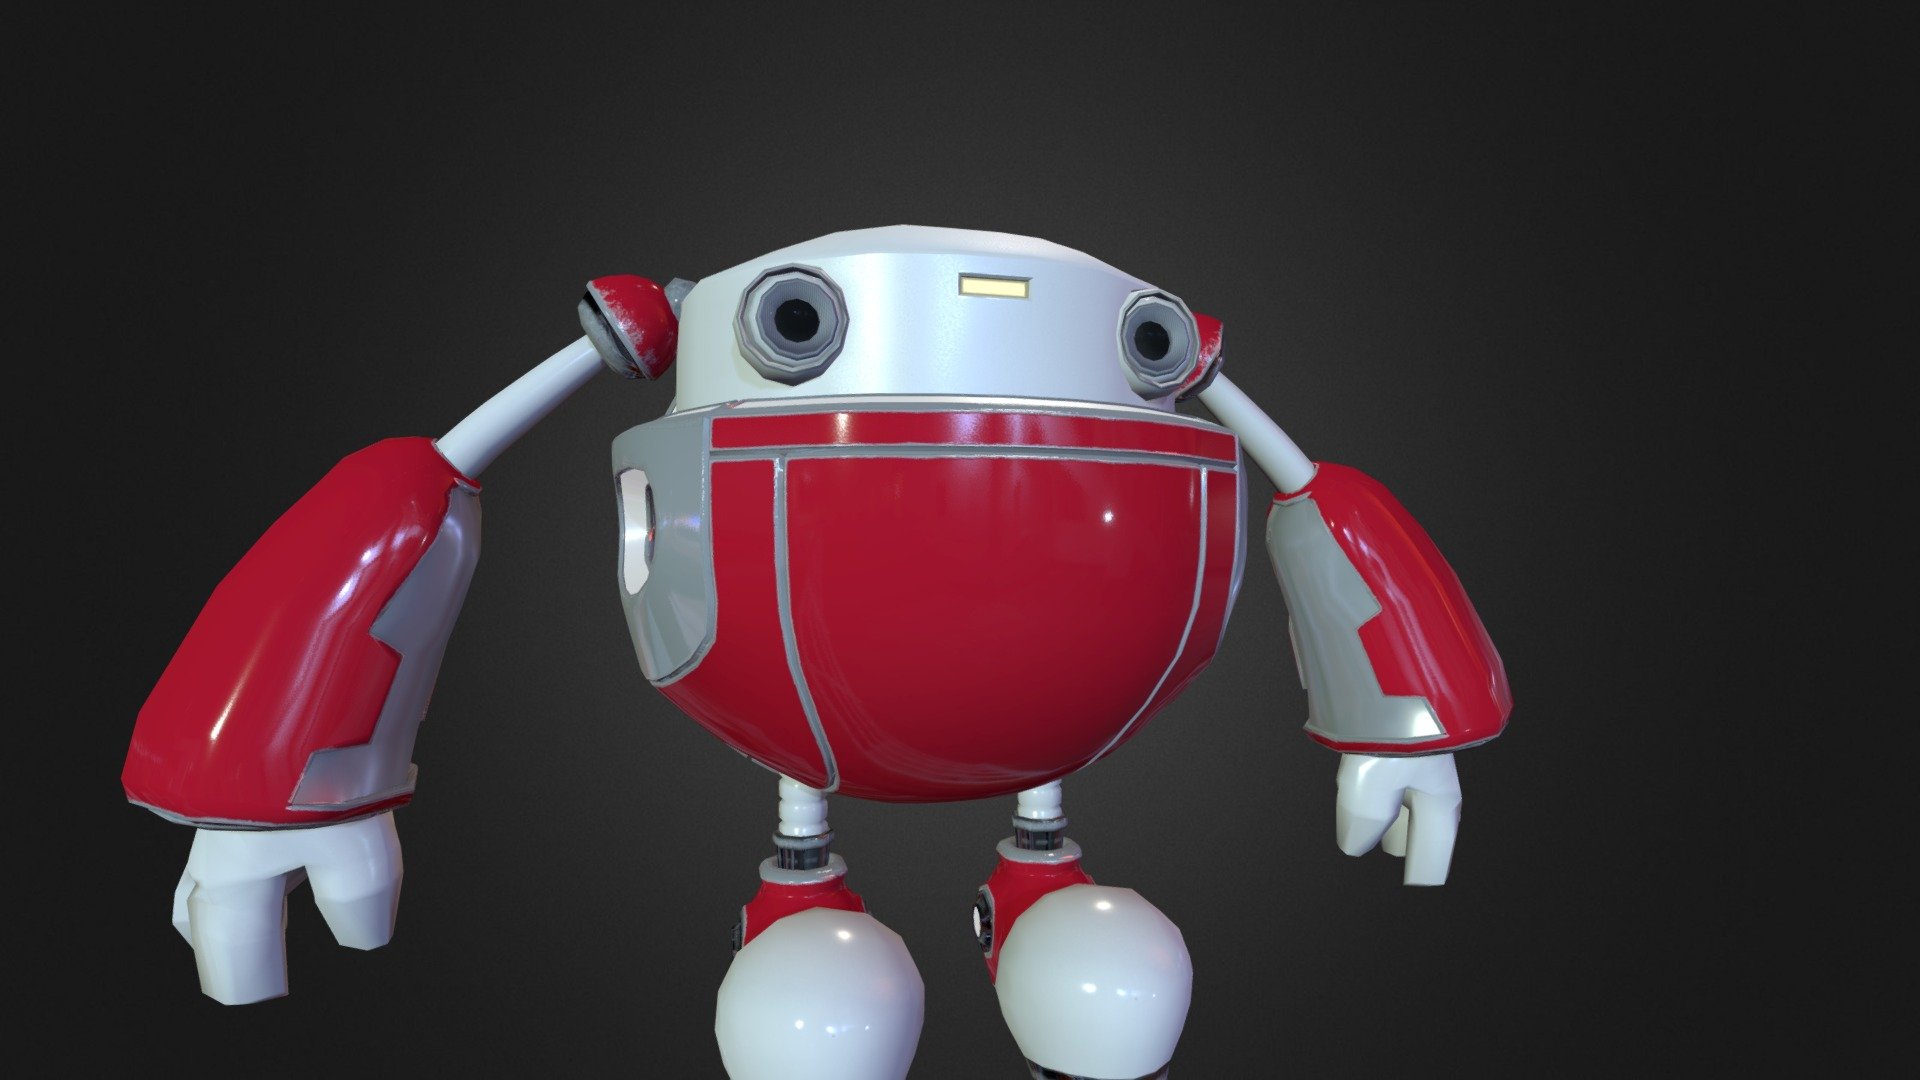 Main Robot Character for Restory Game Project, Concept, Modeling, Texturing,  Skinning, Rigging made by Me.
More info - P.R.U - Robot Version 2.0 - 3D model by Wyano 3d model